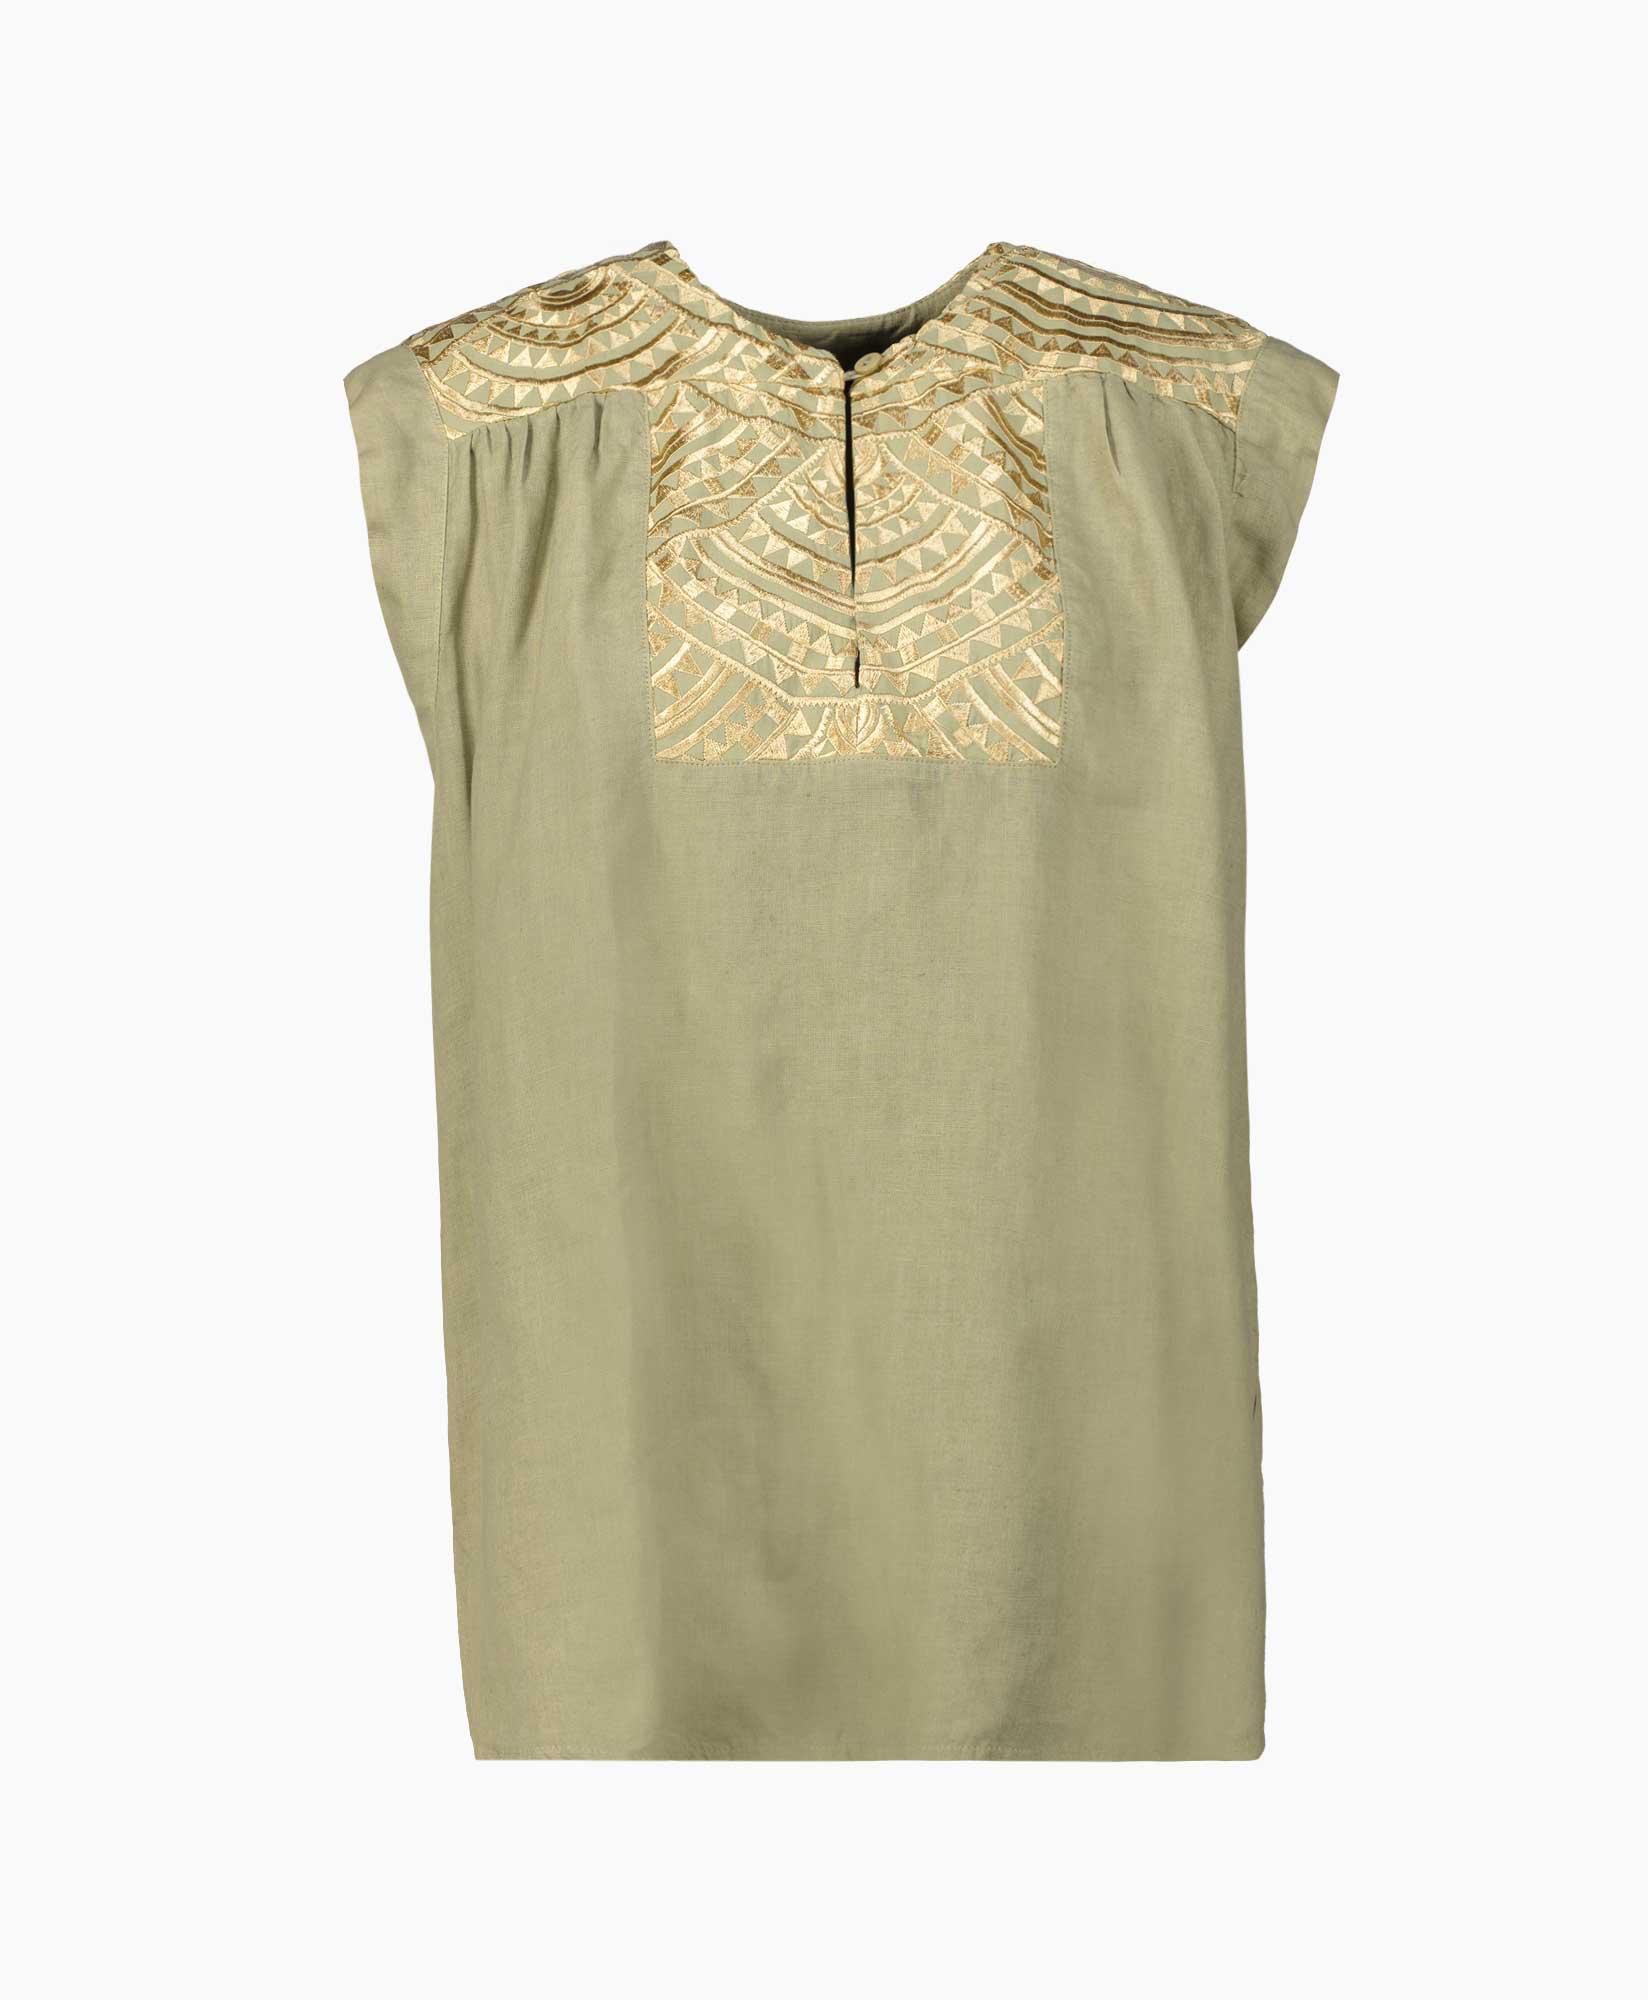 Top New All Over Sleeveless Buttons Goud